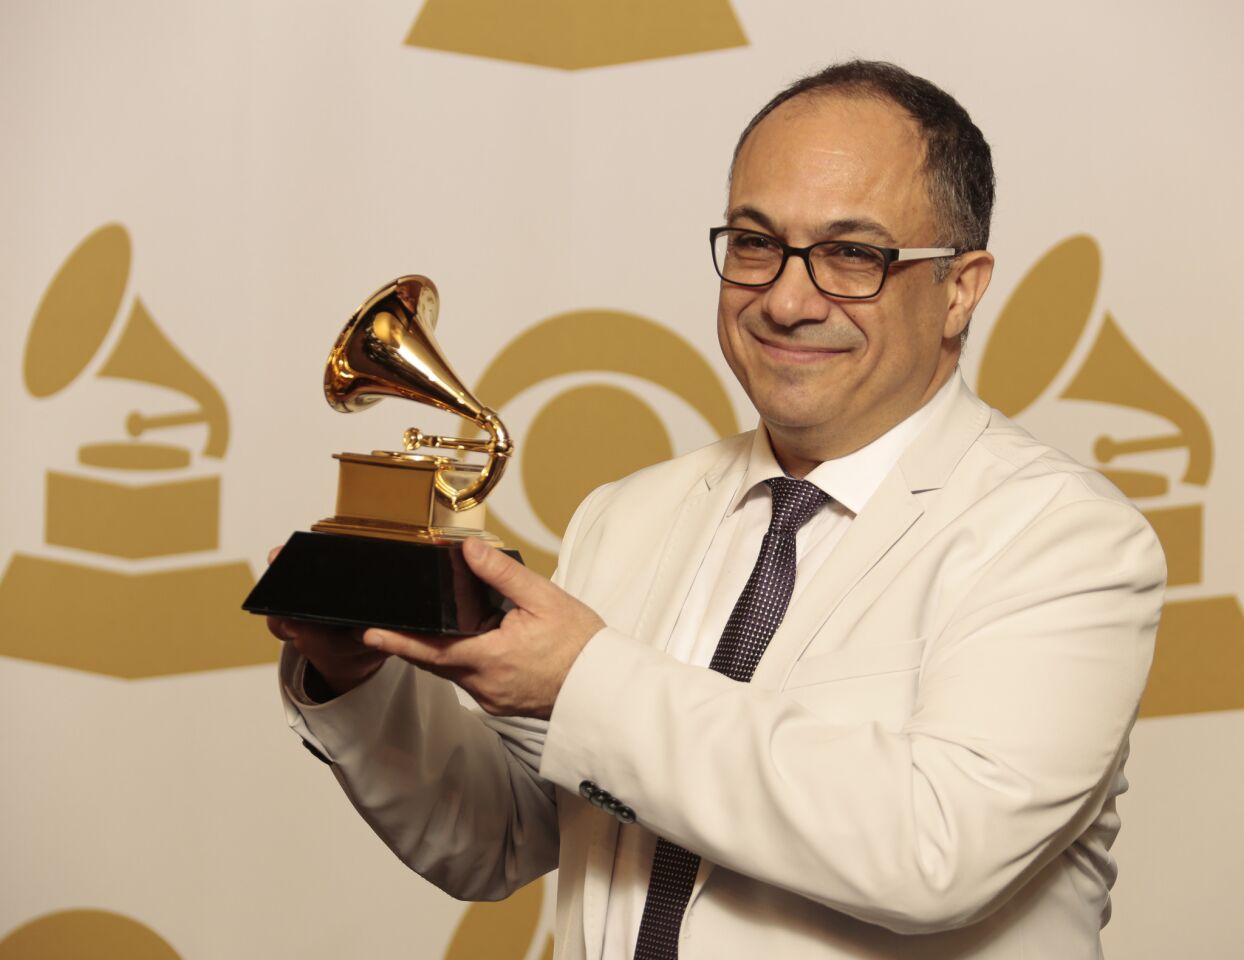 Ashley Kahn wins the album notes Grammy with "Offering: Live At Temple University."